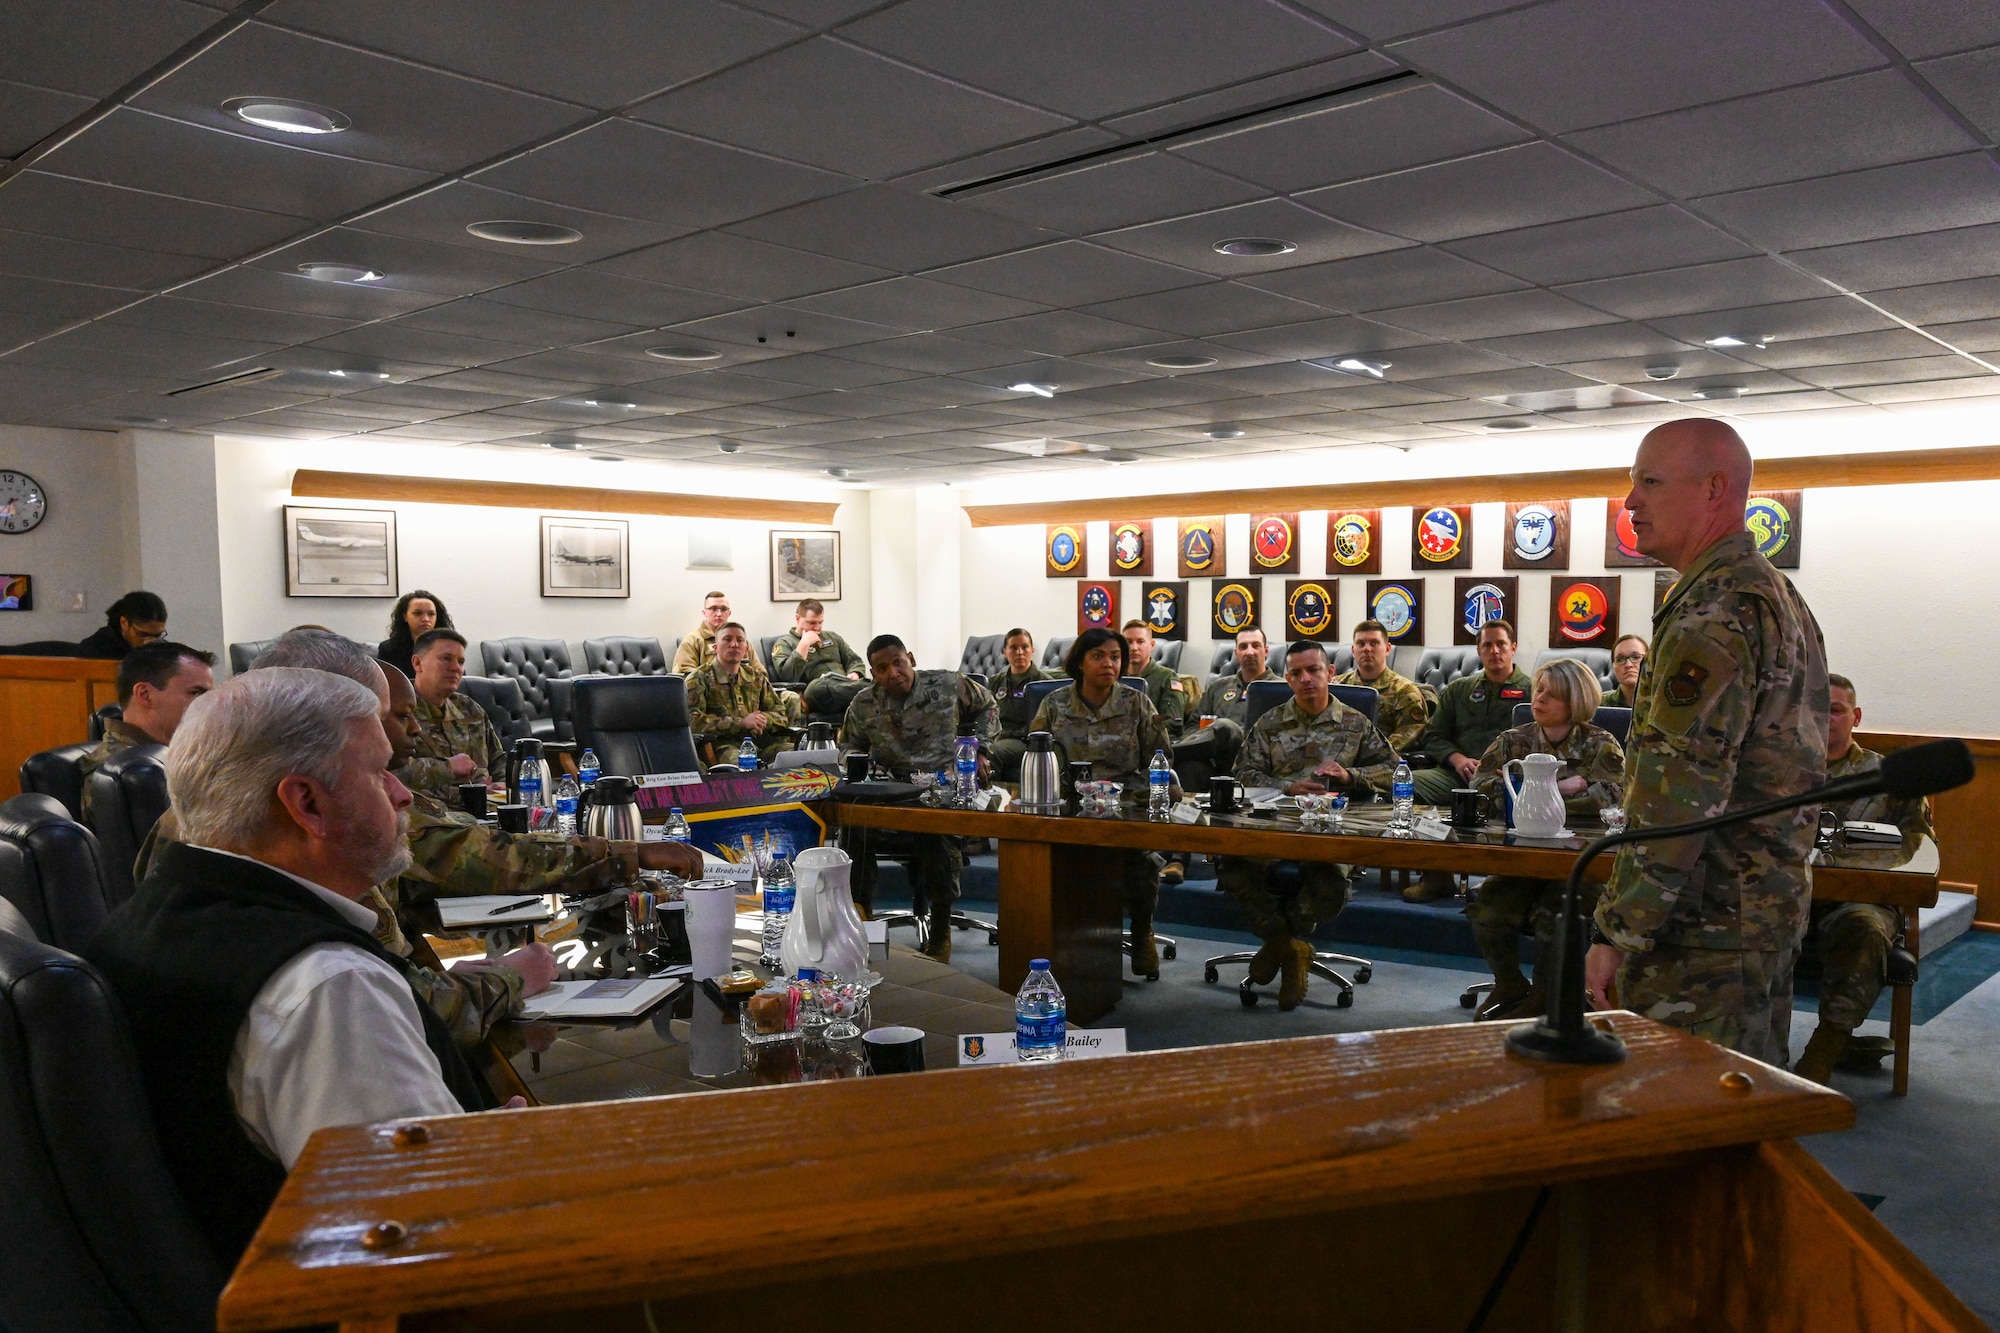 U.S. Air Force Col. Blaine Baker, 97th Air Mobility Wing commander, addresses wing leaders and the Commander in Chief Installation Excellence Award evaluation team in the wing conference room at Altus Air Force Base, Oklahoma, Jan. 19, 2023. During the visit, base leaders portrayed the installation as "the little engine that could" and as a unit that "punches well above their weight class" in regards to resource utilization and mission execution. (U.S. Air Force photo by Senior Airman Trenton Jancze)